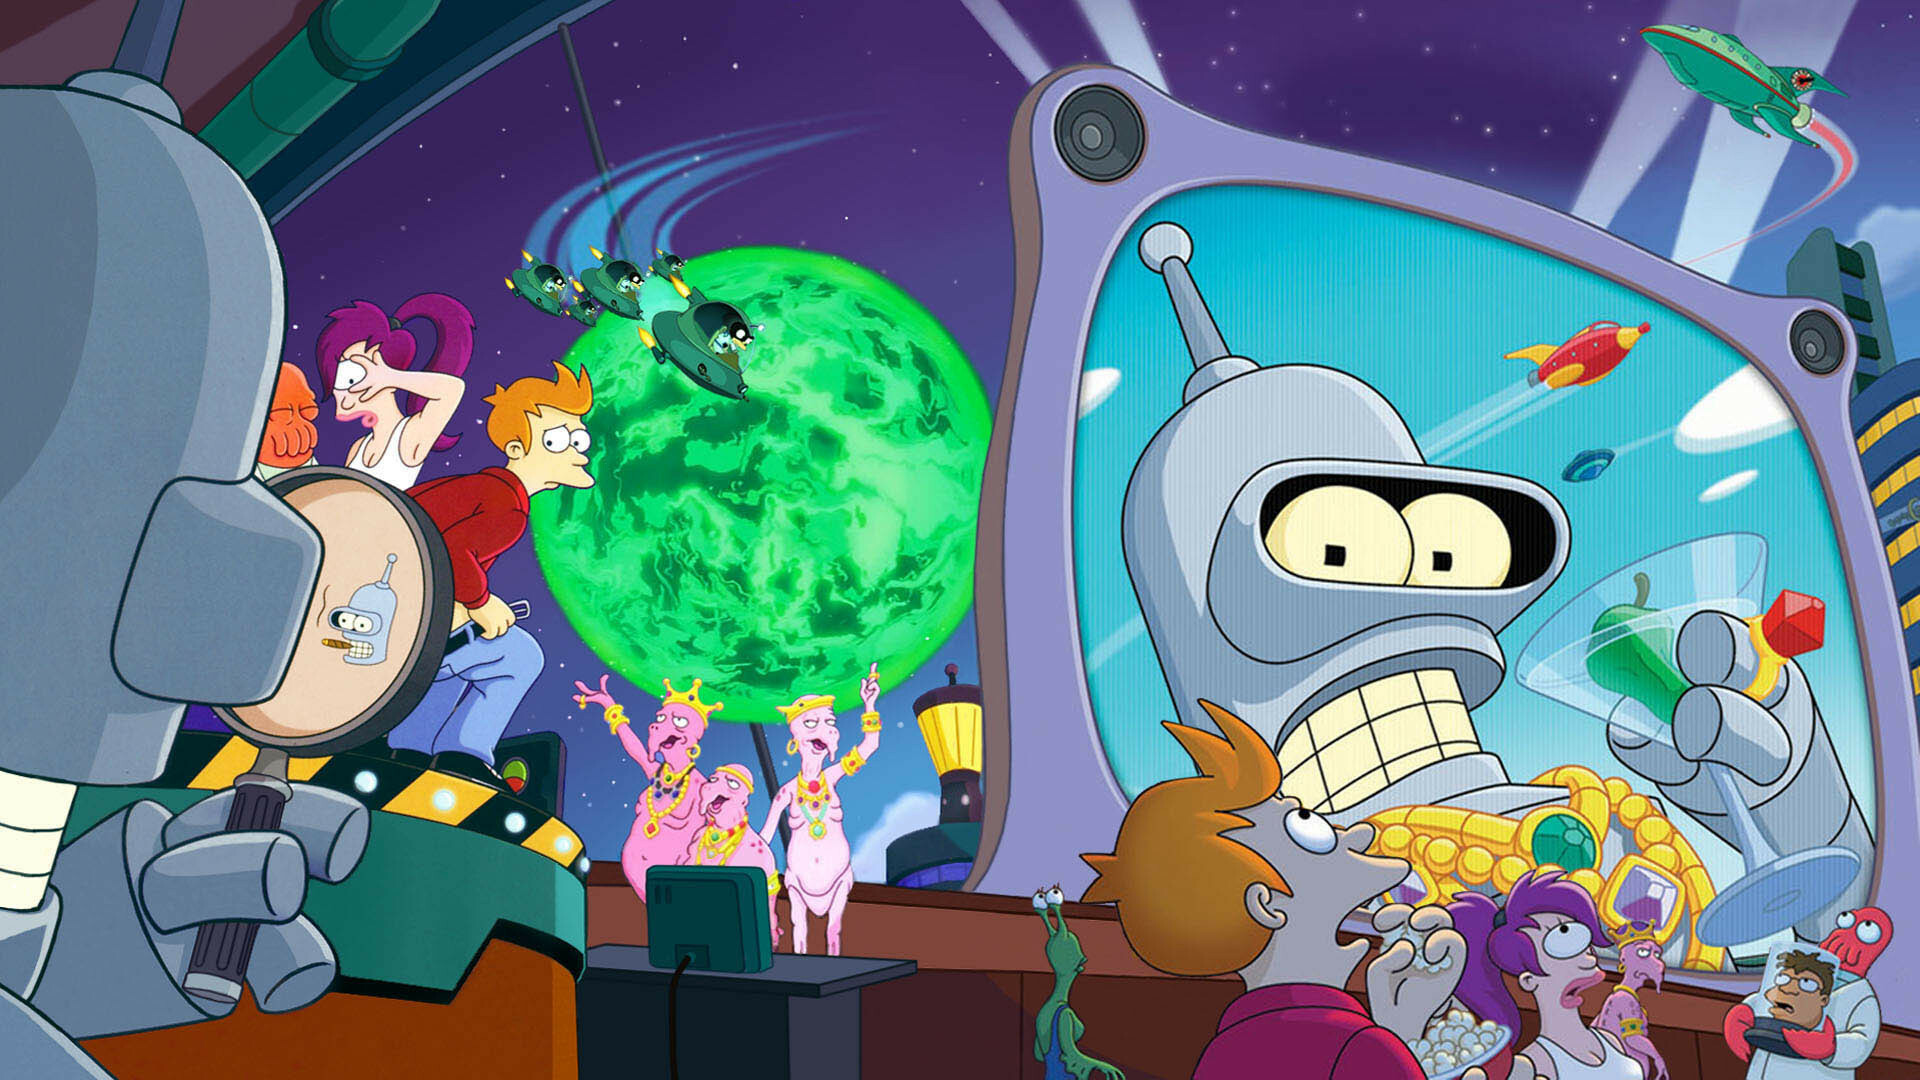 Futurama: An animated comedy series that follows Fry, a delivery boy who accidentally gets cryogenically frozen. 1920x1080 Full HD Wallpaper.